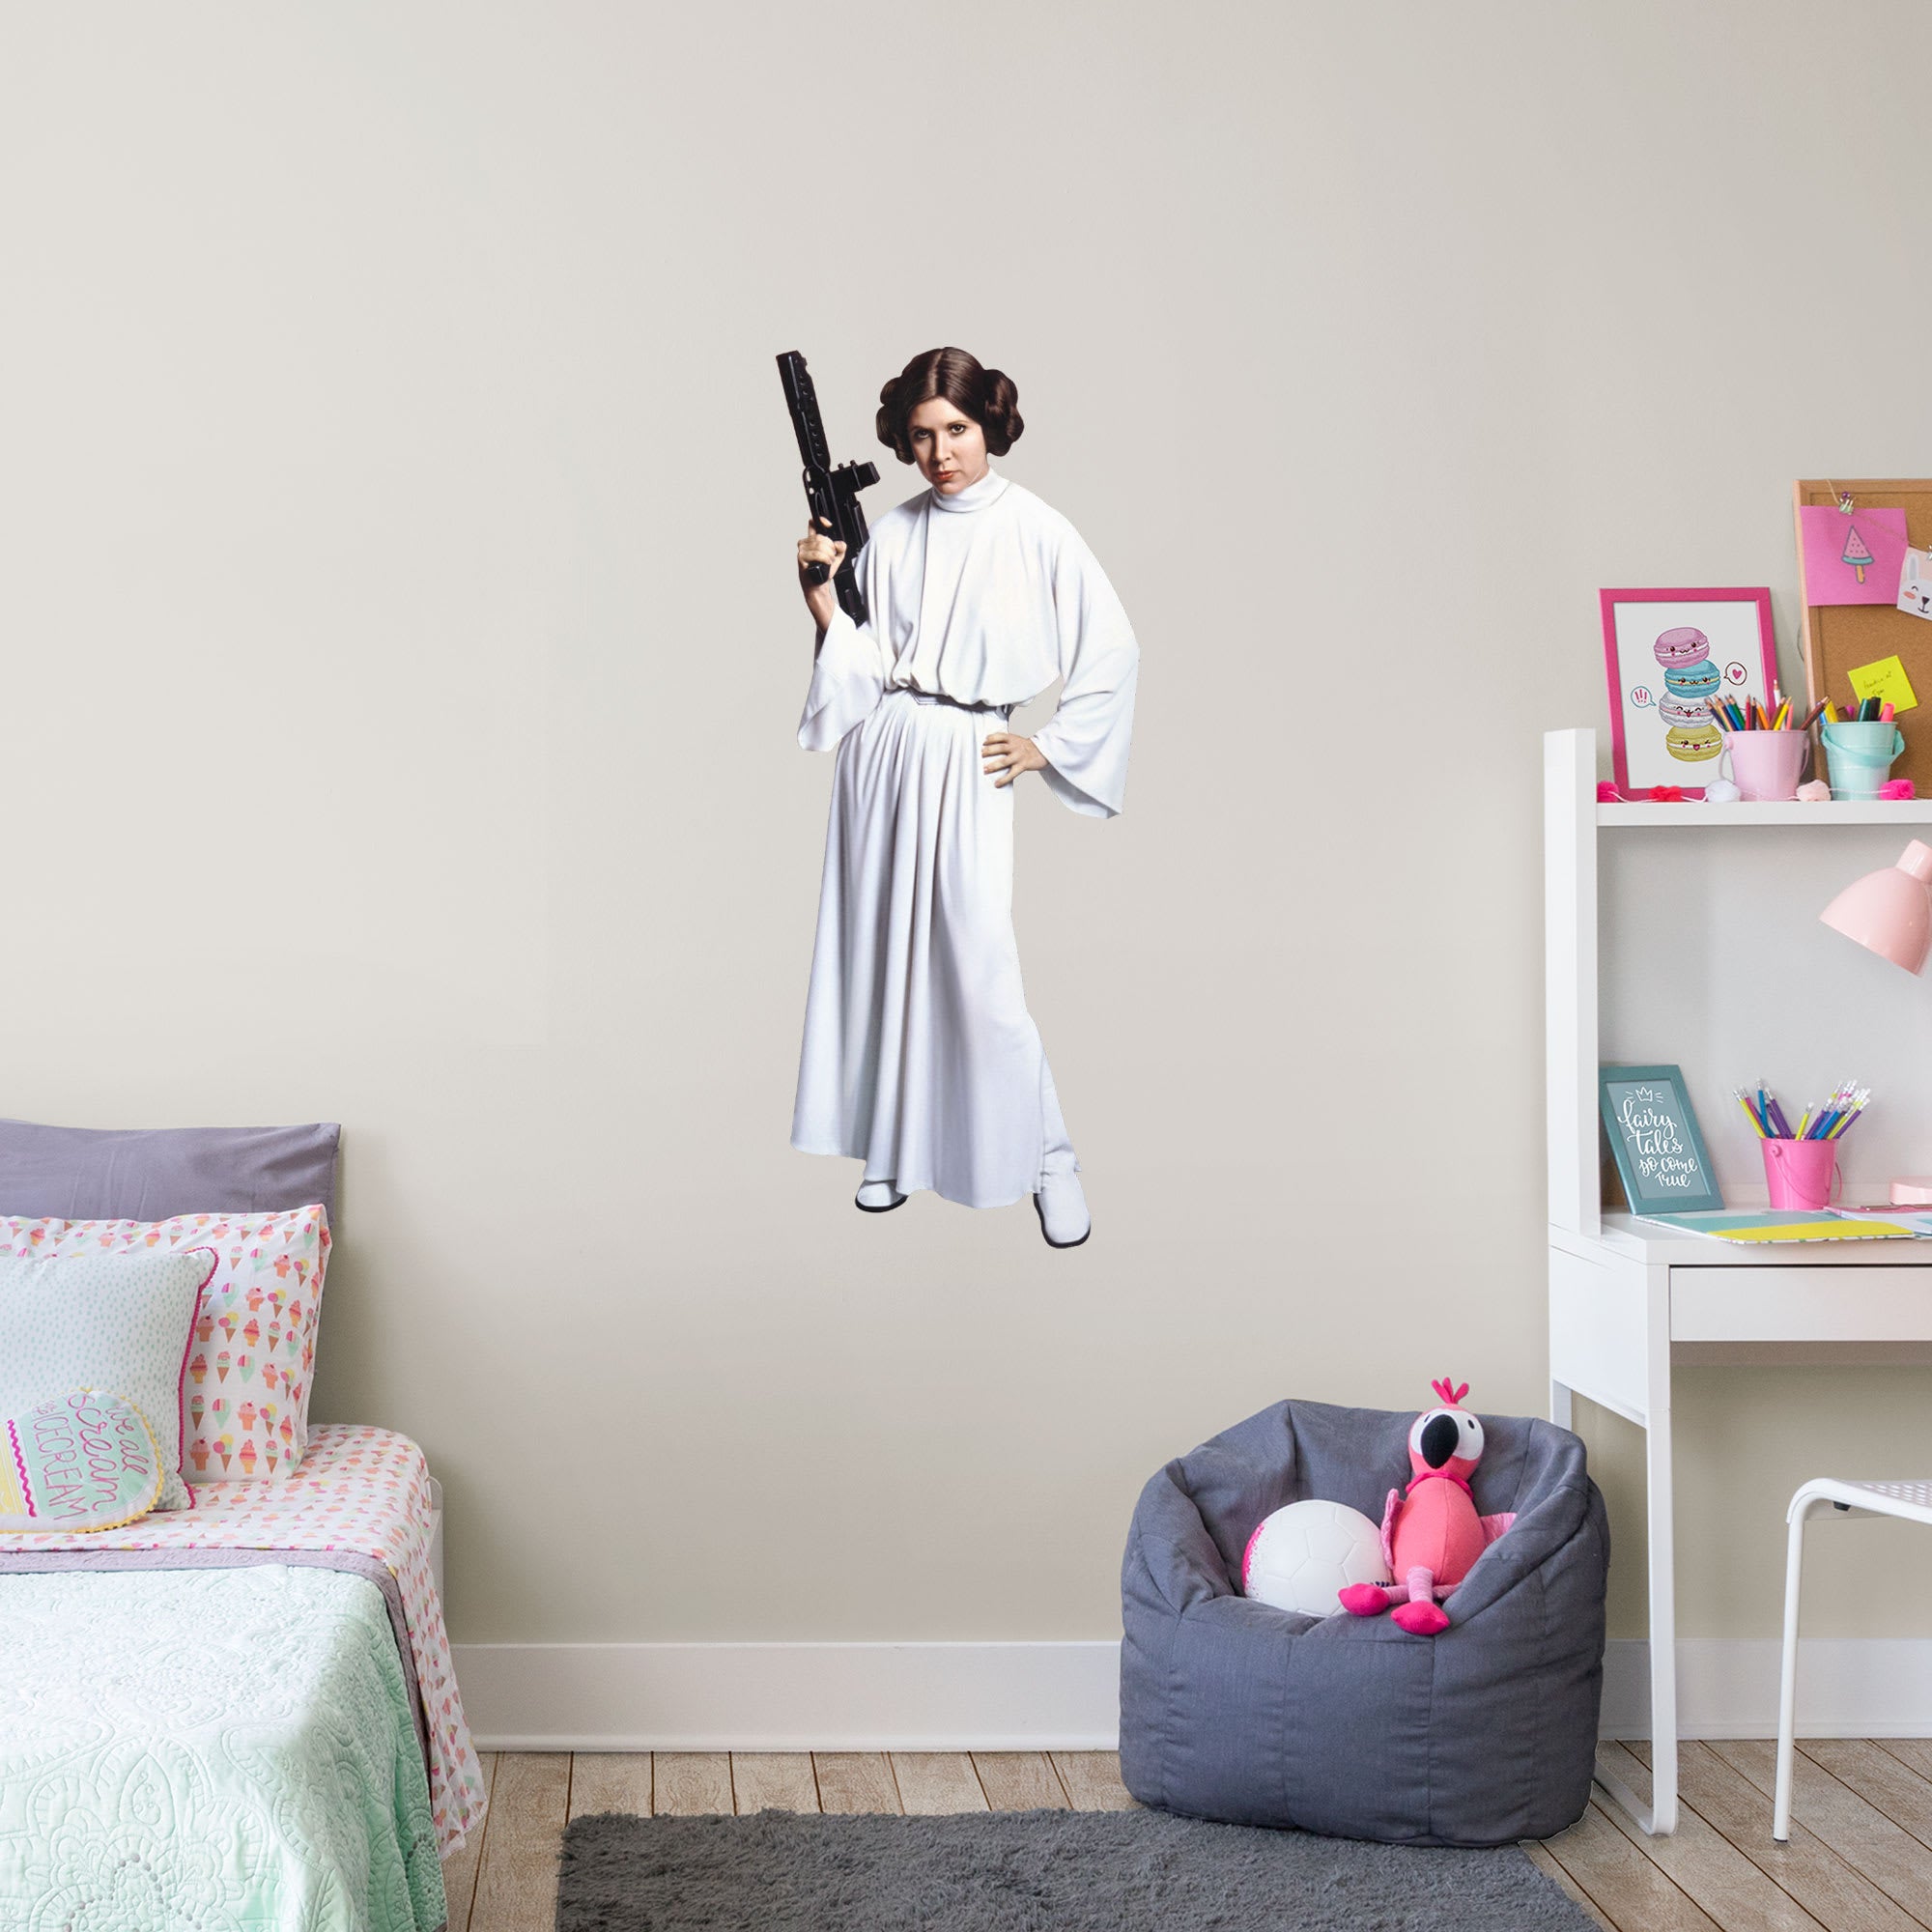 Princess Leia - Officially Licensed Removable Wall Decal Giant Character + 2 Decals (20.5"W x 51"H) by Fathead | Vinyl